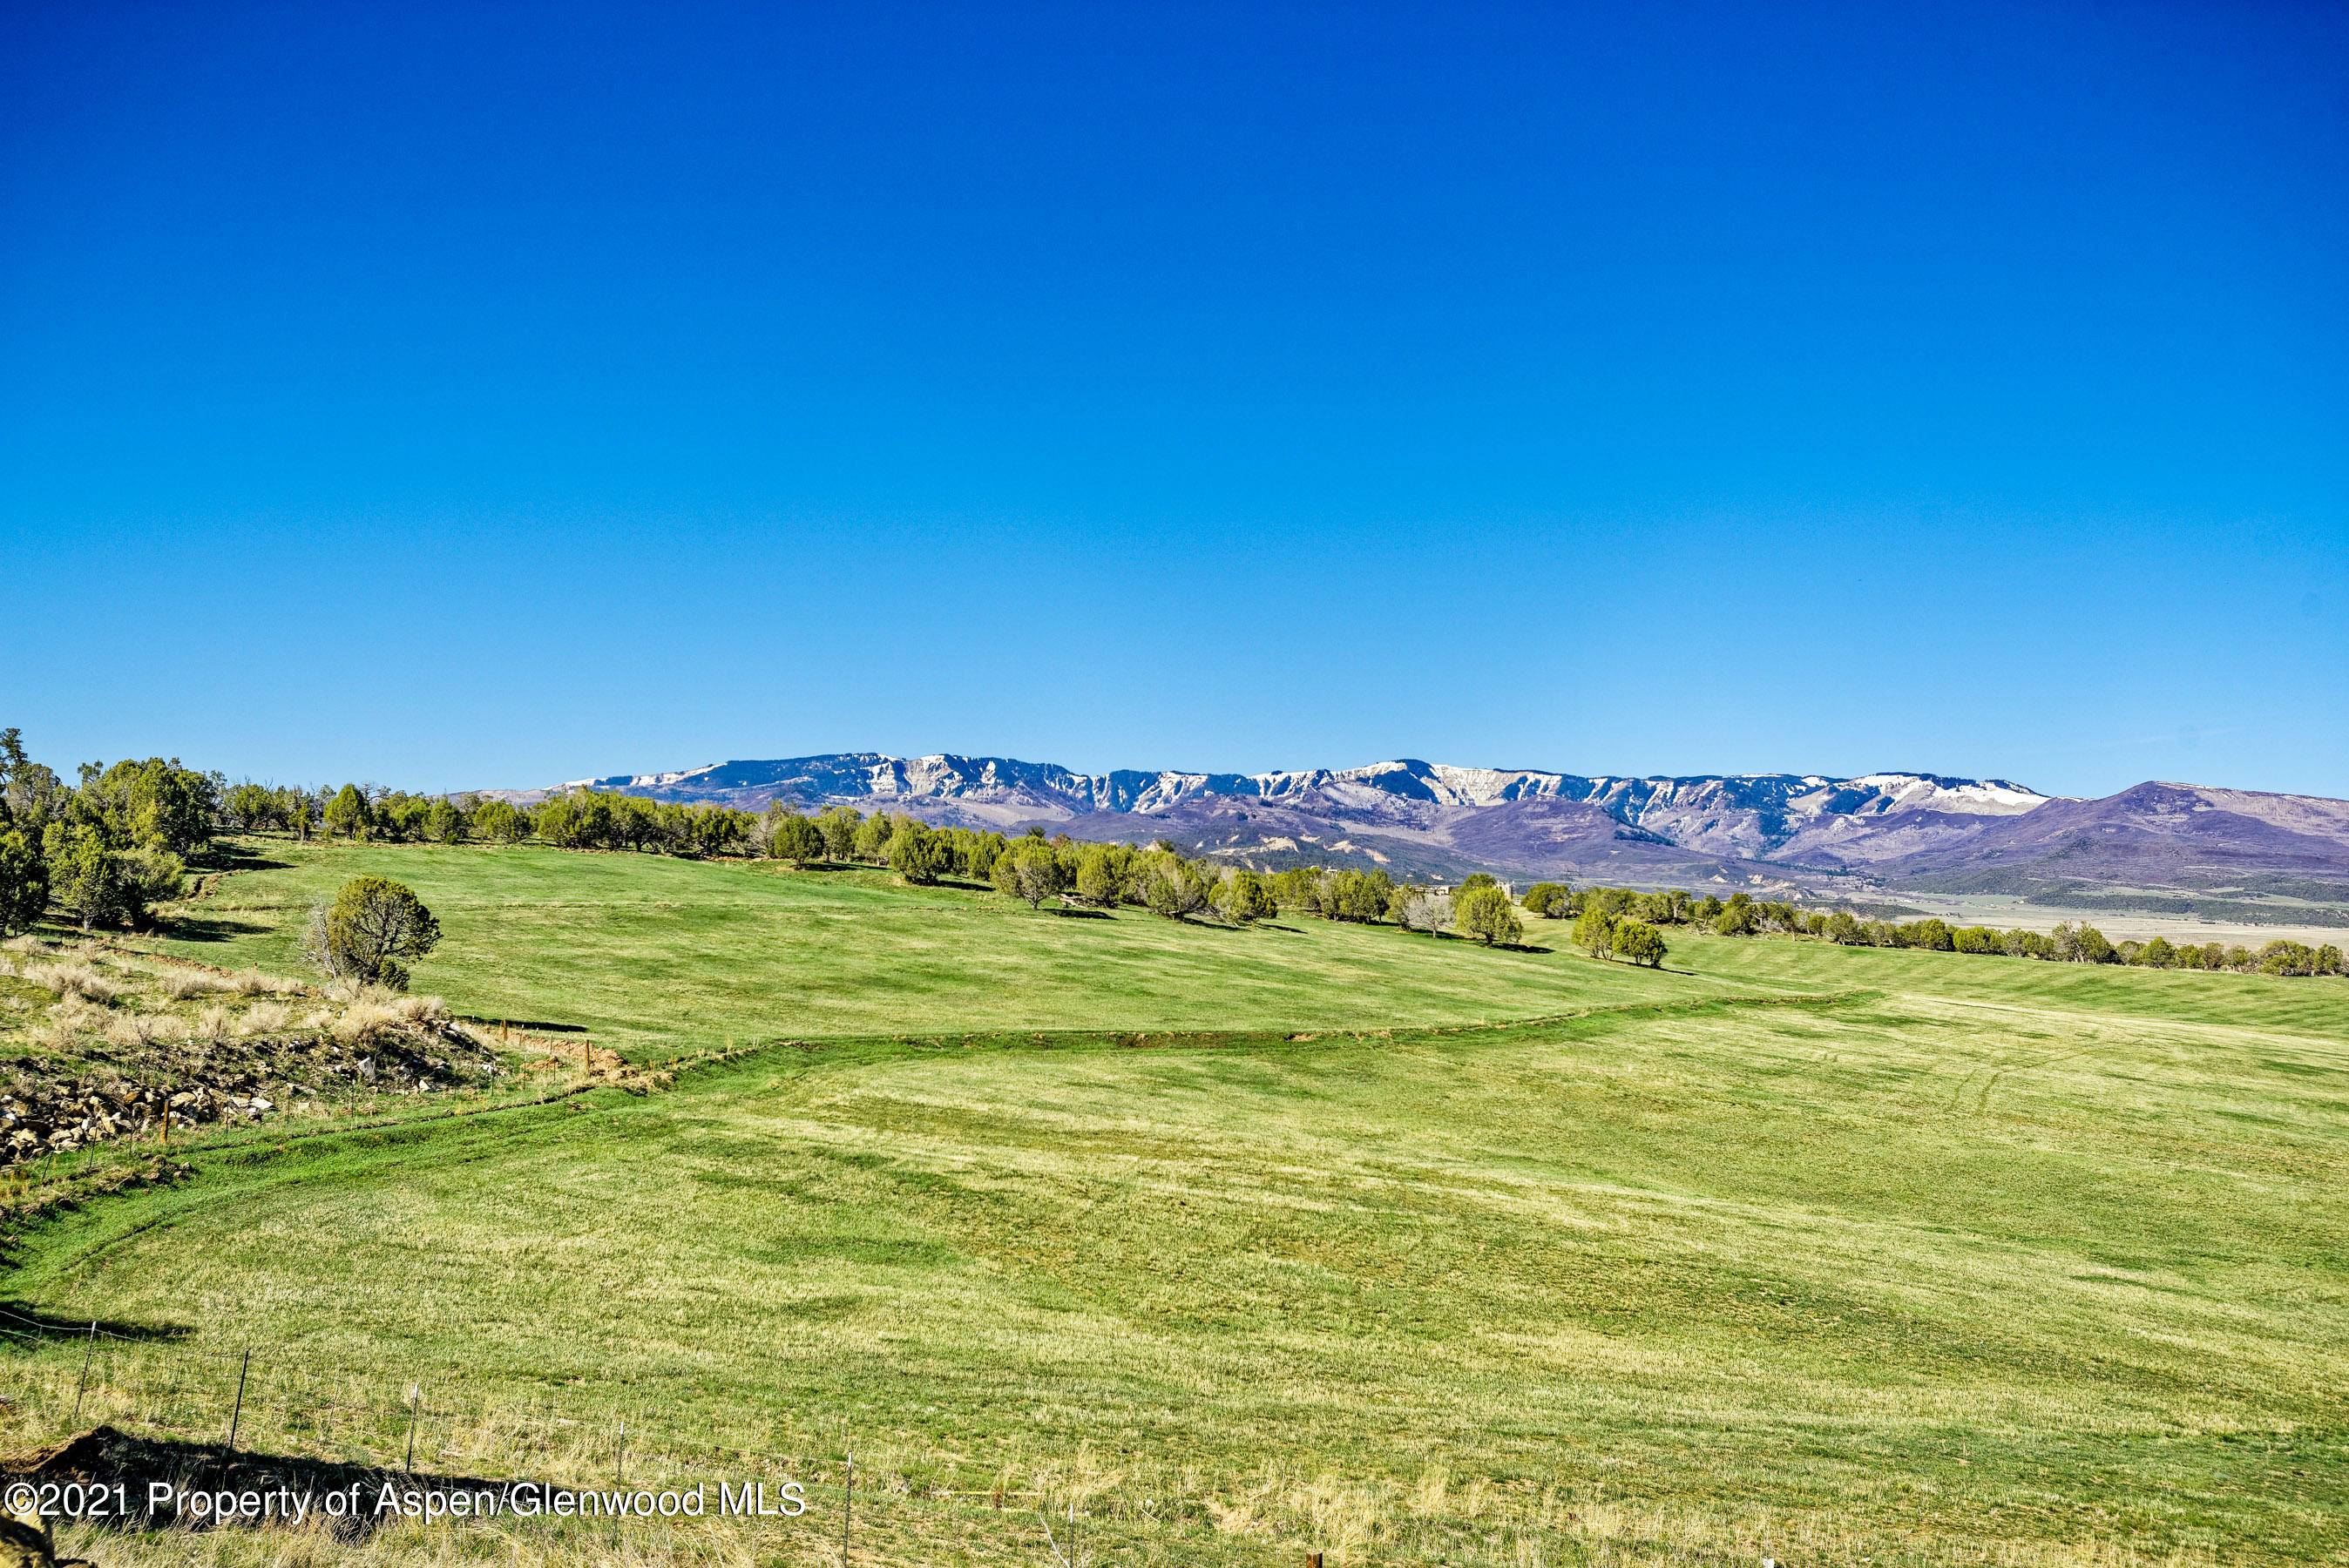 Located just south of Silt, this 122 acre ranch has privacy, incredible views of the valley and approximately 70 irrigated acres.